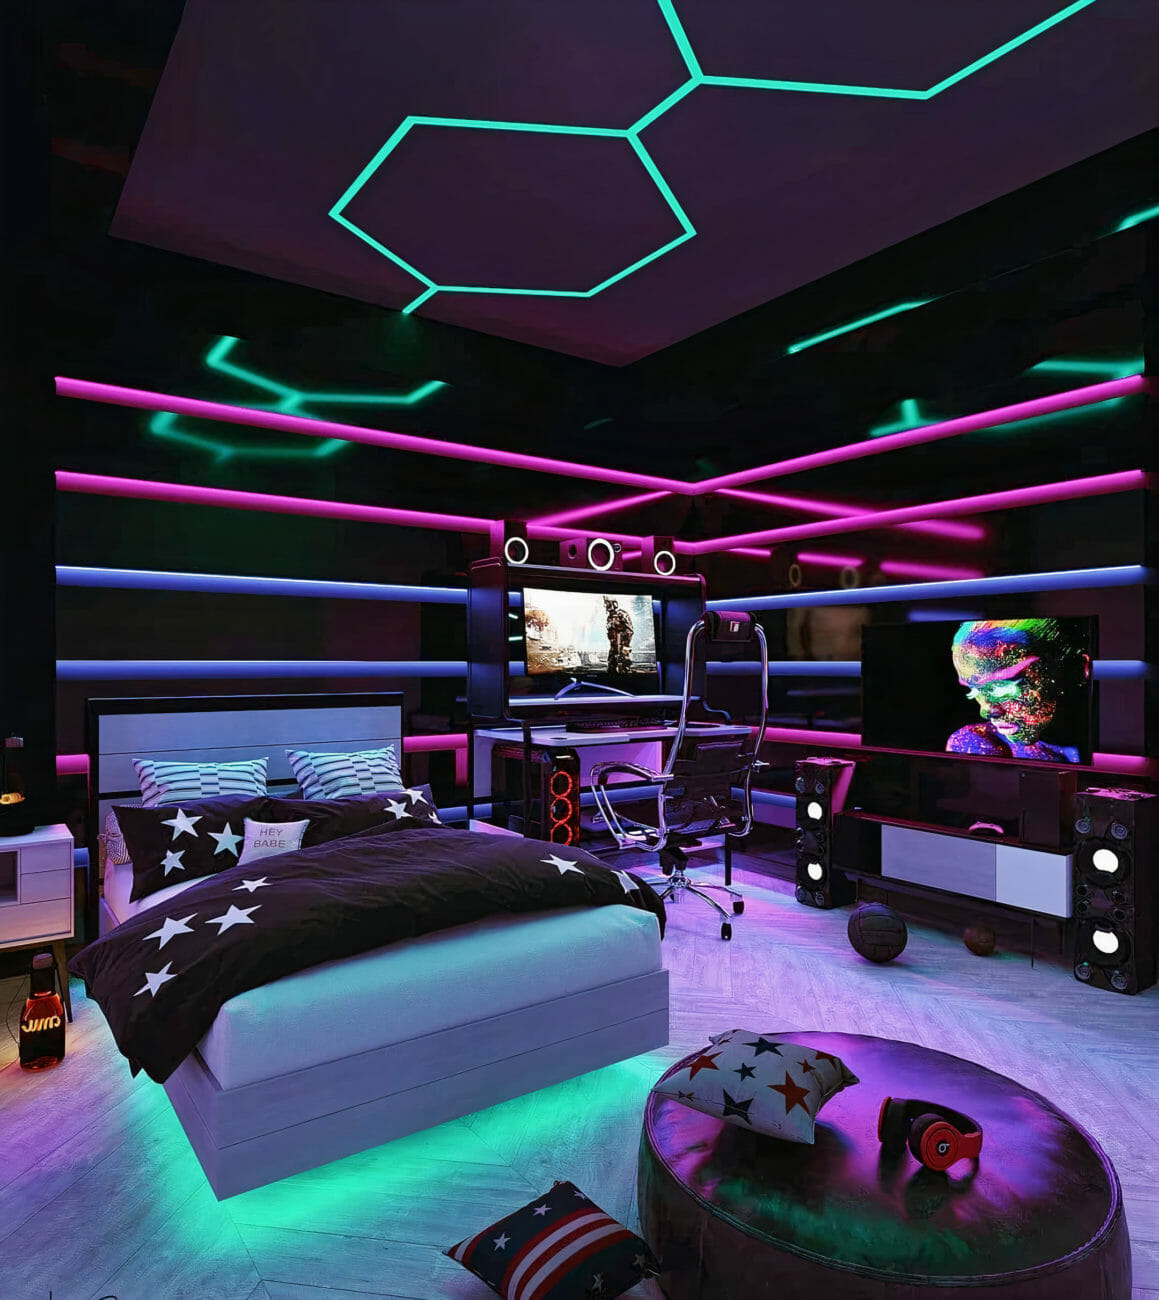 Gaming-Room Design With Bed